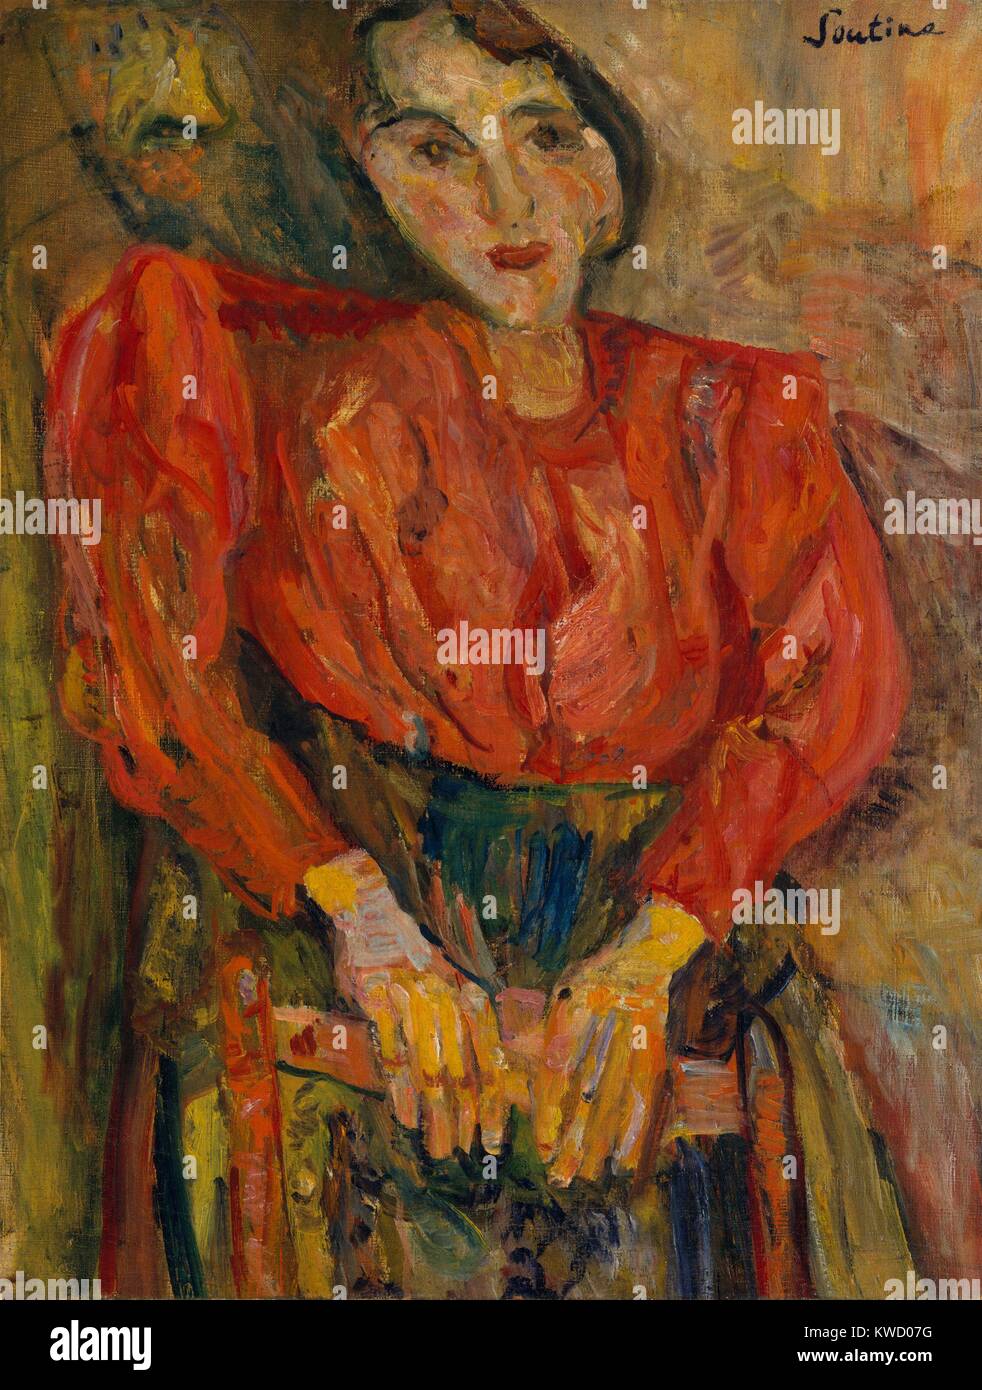 Woman in Red Blouse, by Chaim Soutine, 1919, Russian French Expressionist painting, oil on canvas. The artist applied paint in a thick impasto, covering the canvas, with energetic brushwork, and emotionally dissonant distortion of human forms (BSLOC 2017 5 149) Stock Photo